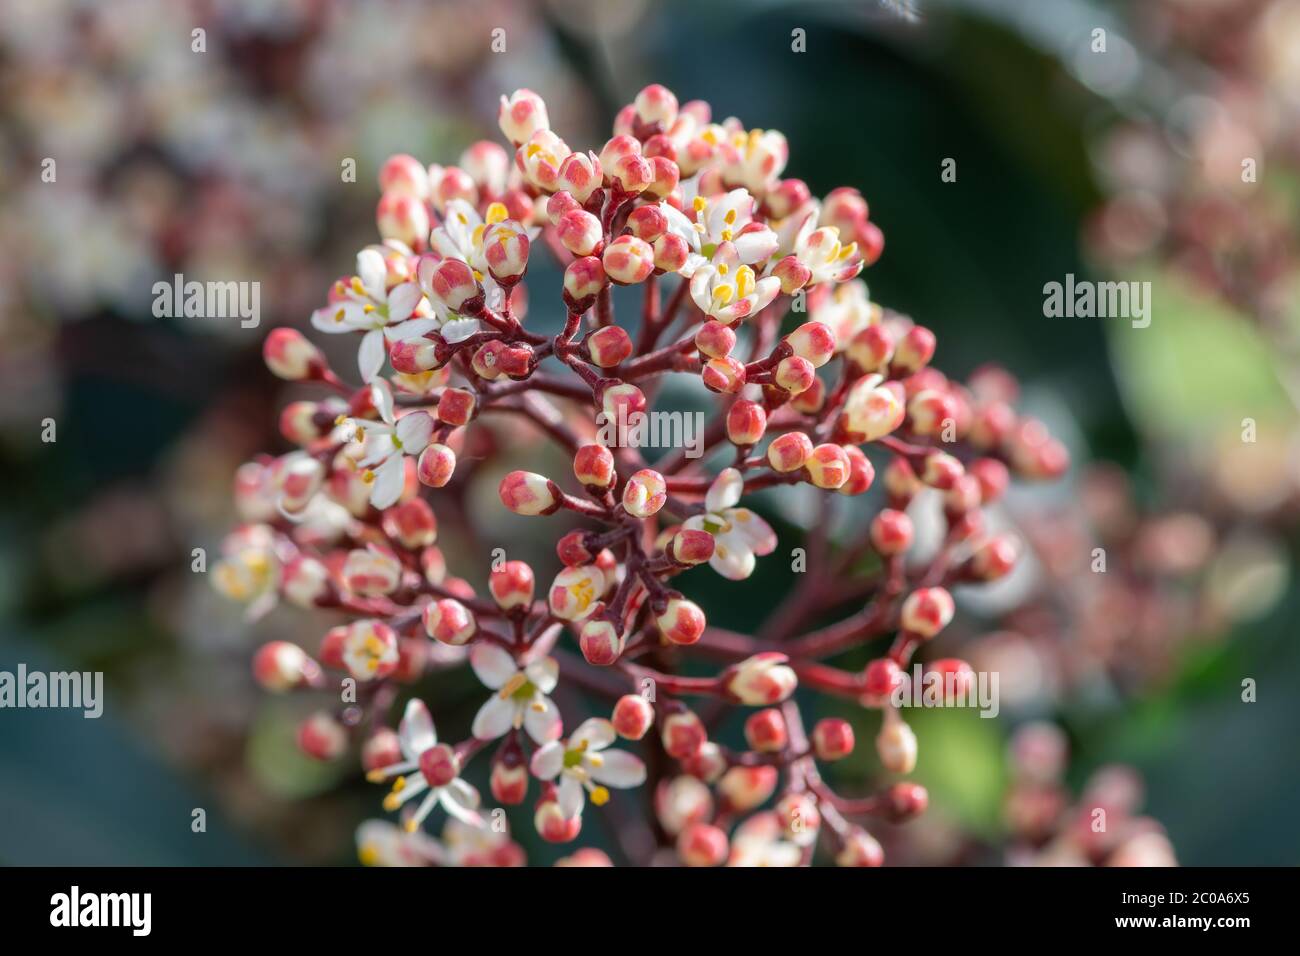 Close up of Japanese skimmia (skimmia japonica) flowers in bloom Stock Photo